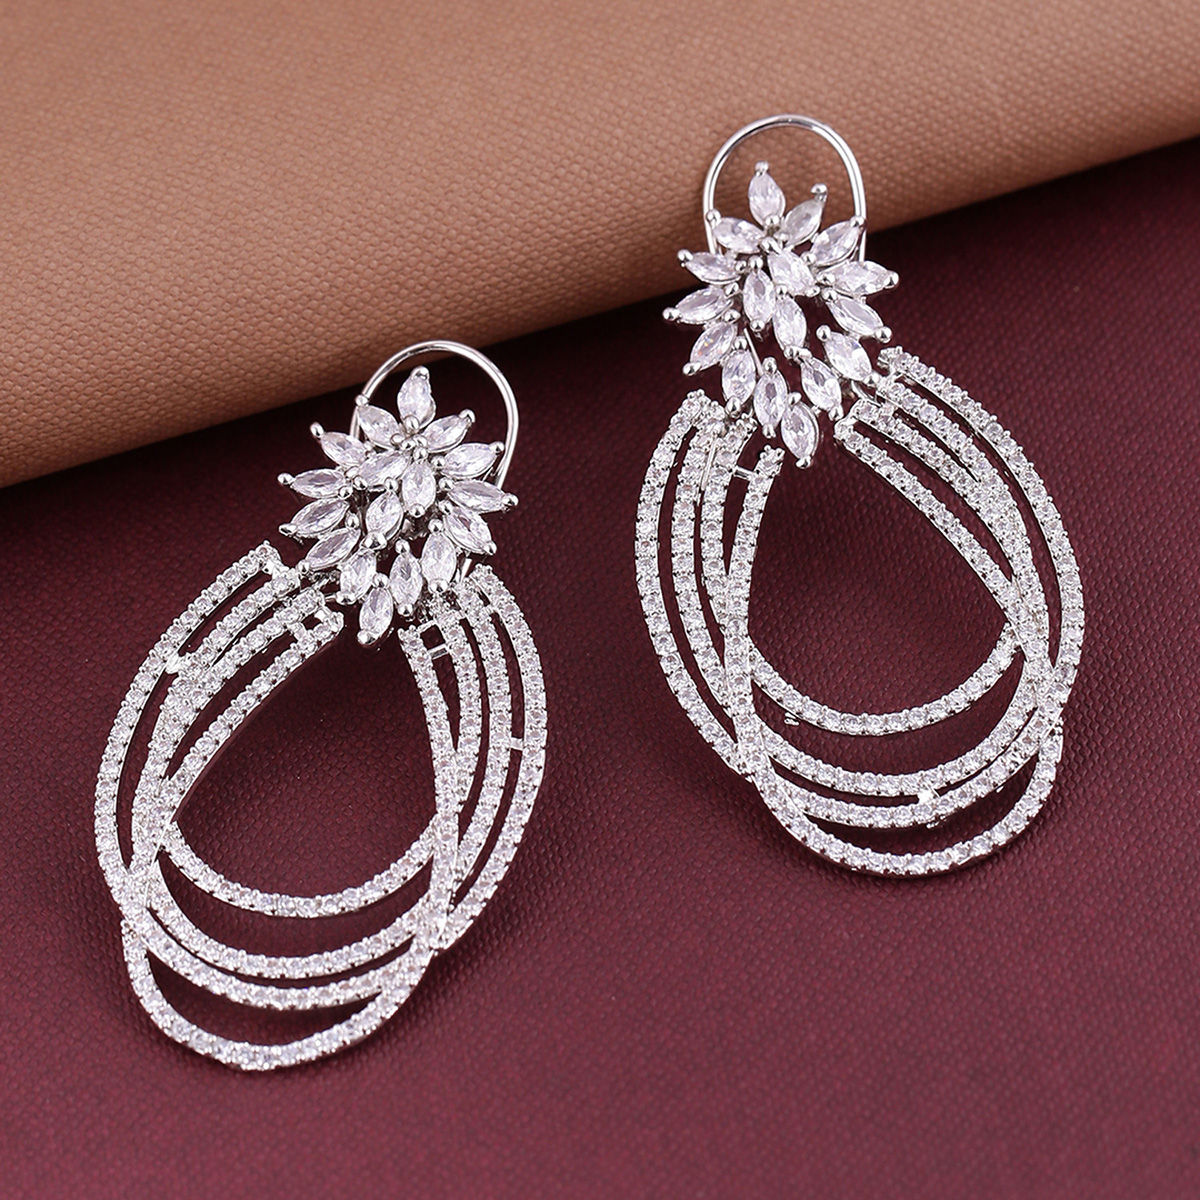 Saanjh White And Yellow Diamond Cocktail Earrings  Timeless Indian Jewelry   Aurus